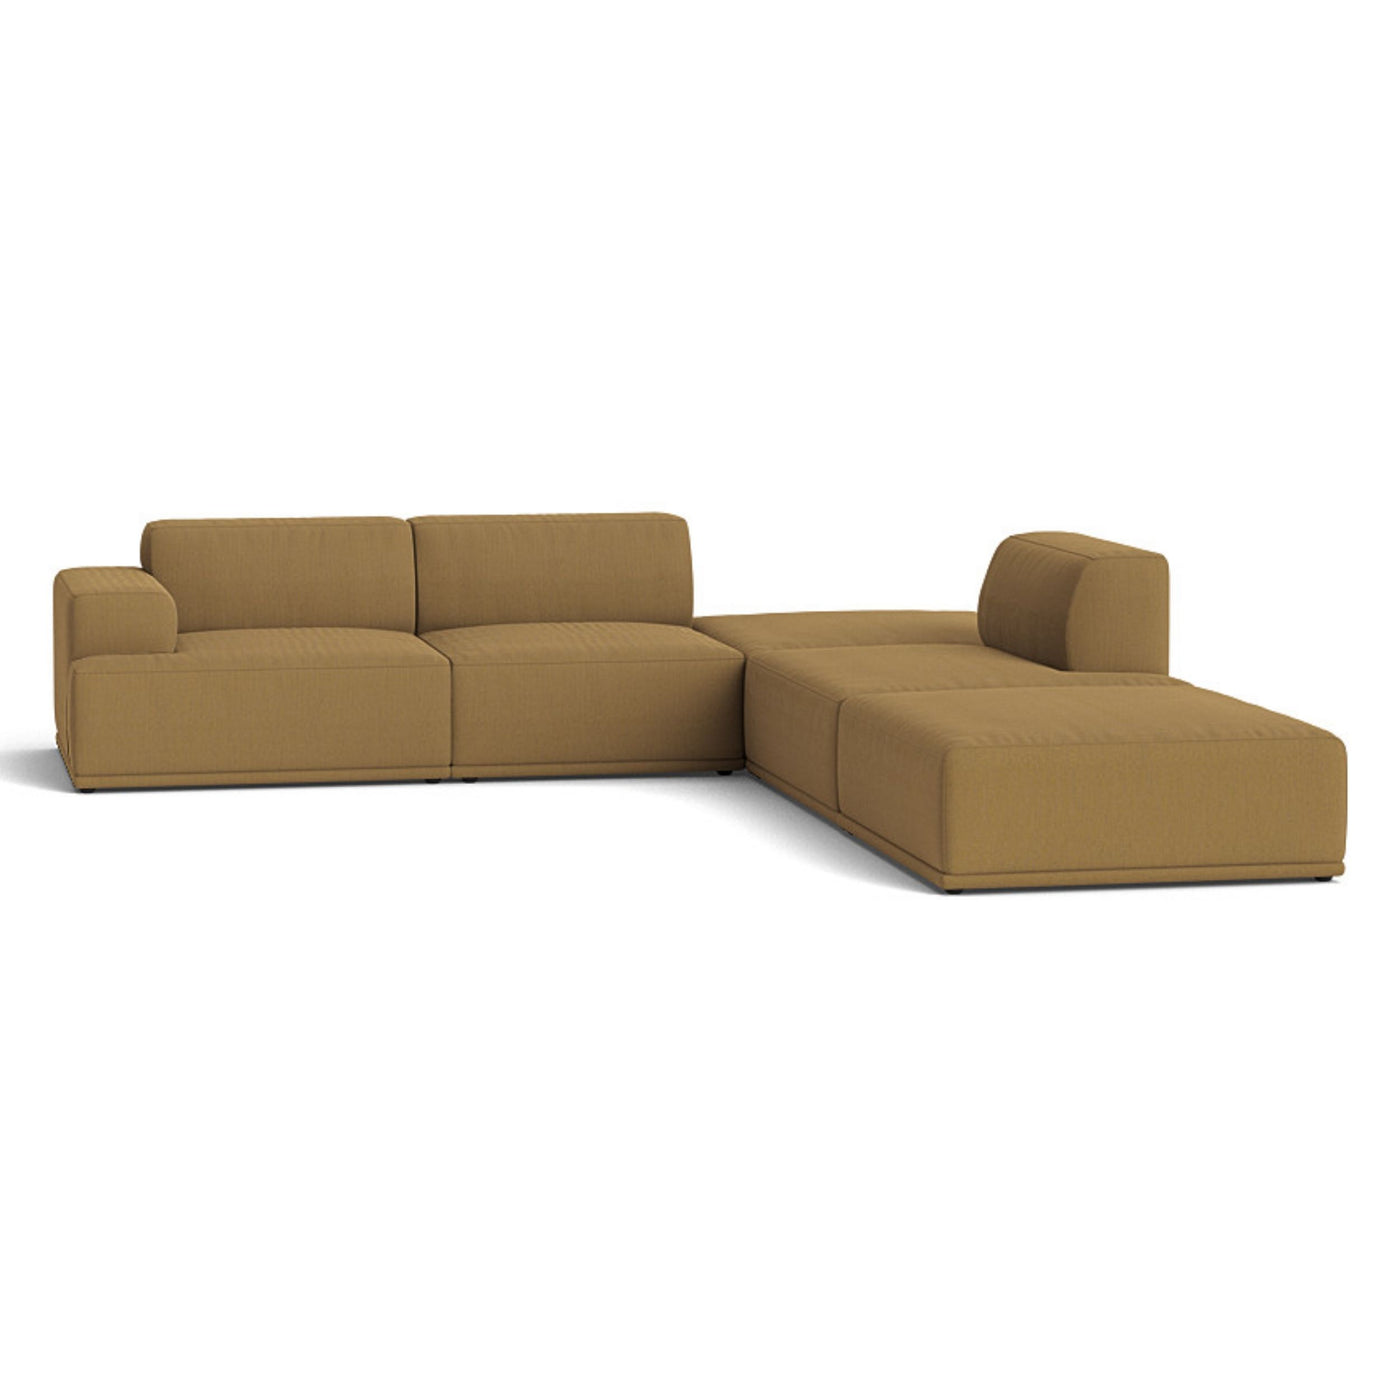 Muuto Connect Soft Modular Corner Sofa, configuration 3. made-to-order from someday designs. #colour_re-wool-448